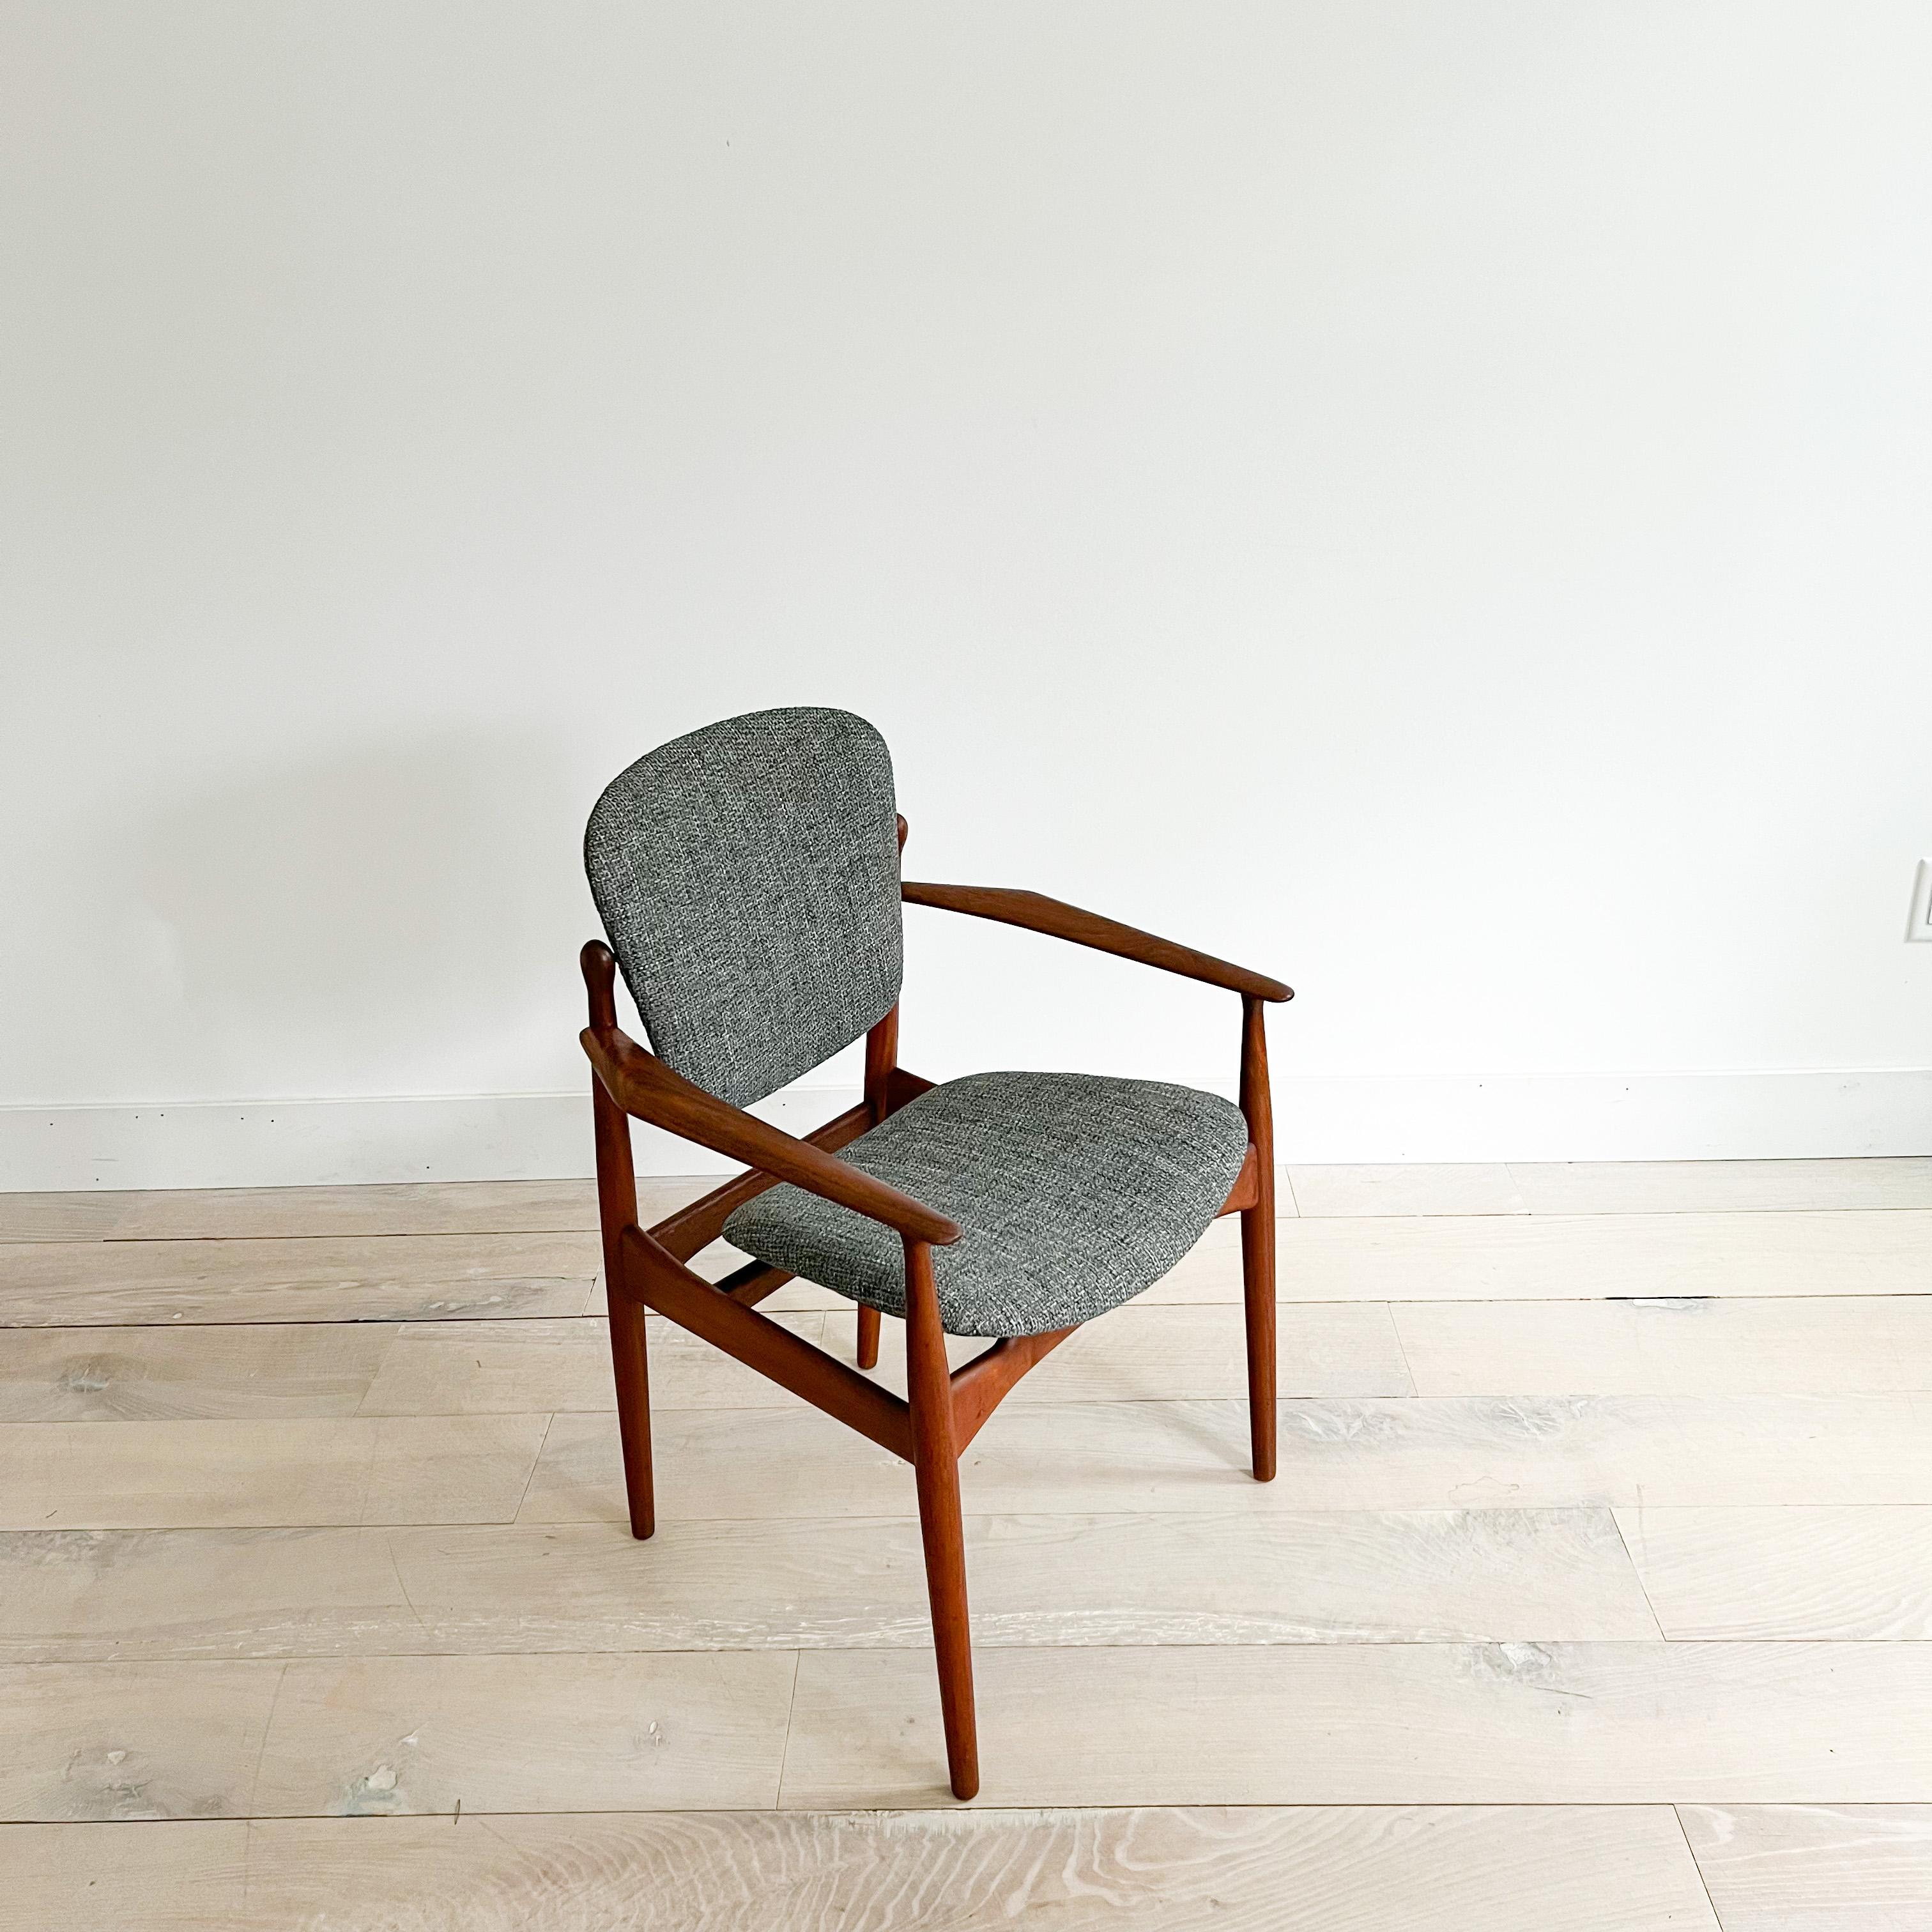 Mid century modern danish teak tilt back occasional chair by Arne Vodder for France & Daverkosen. Stamped underneath. New foam and grey tweed upholstery. Some scuffing/scratching from age appropriate wear. The tilt back works nicely and makes for an